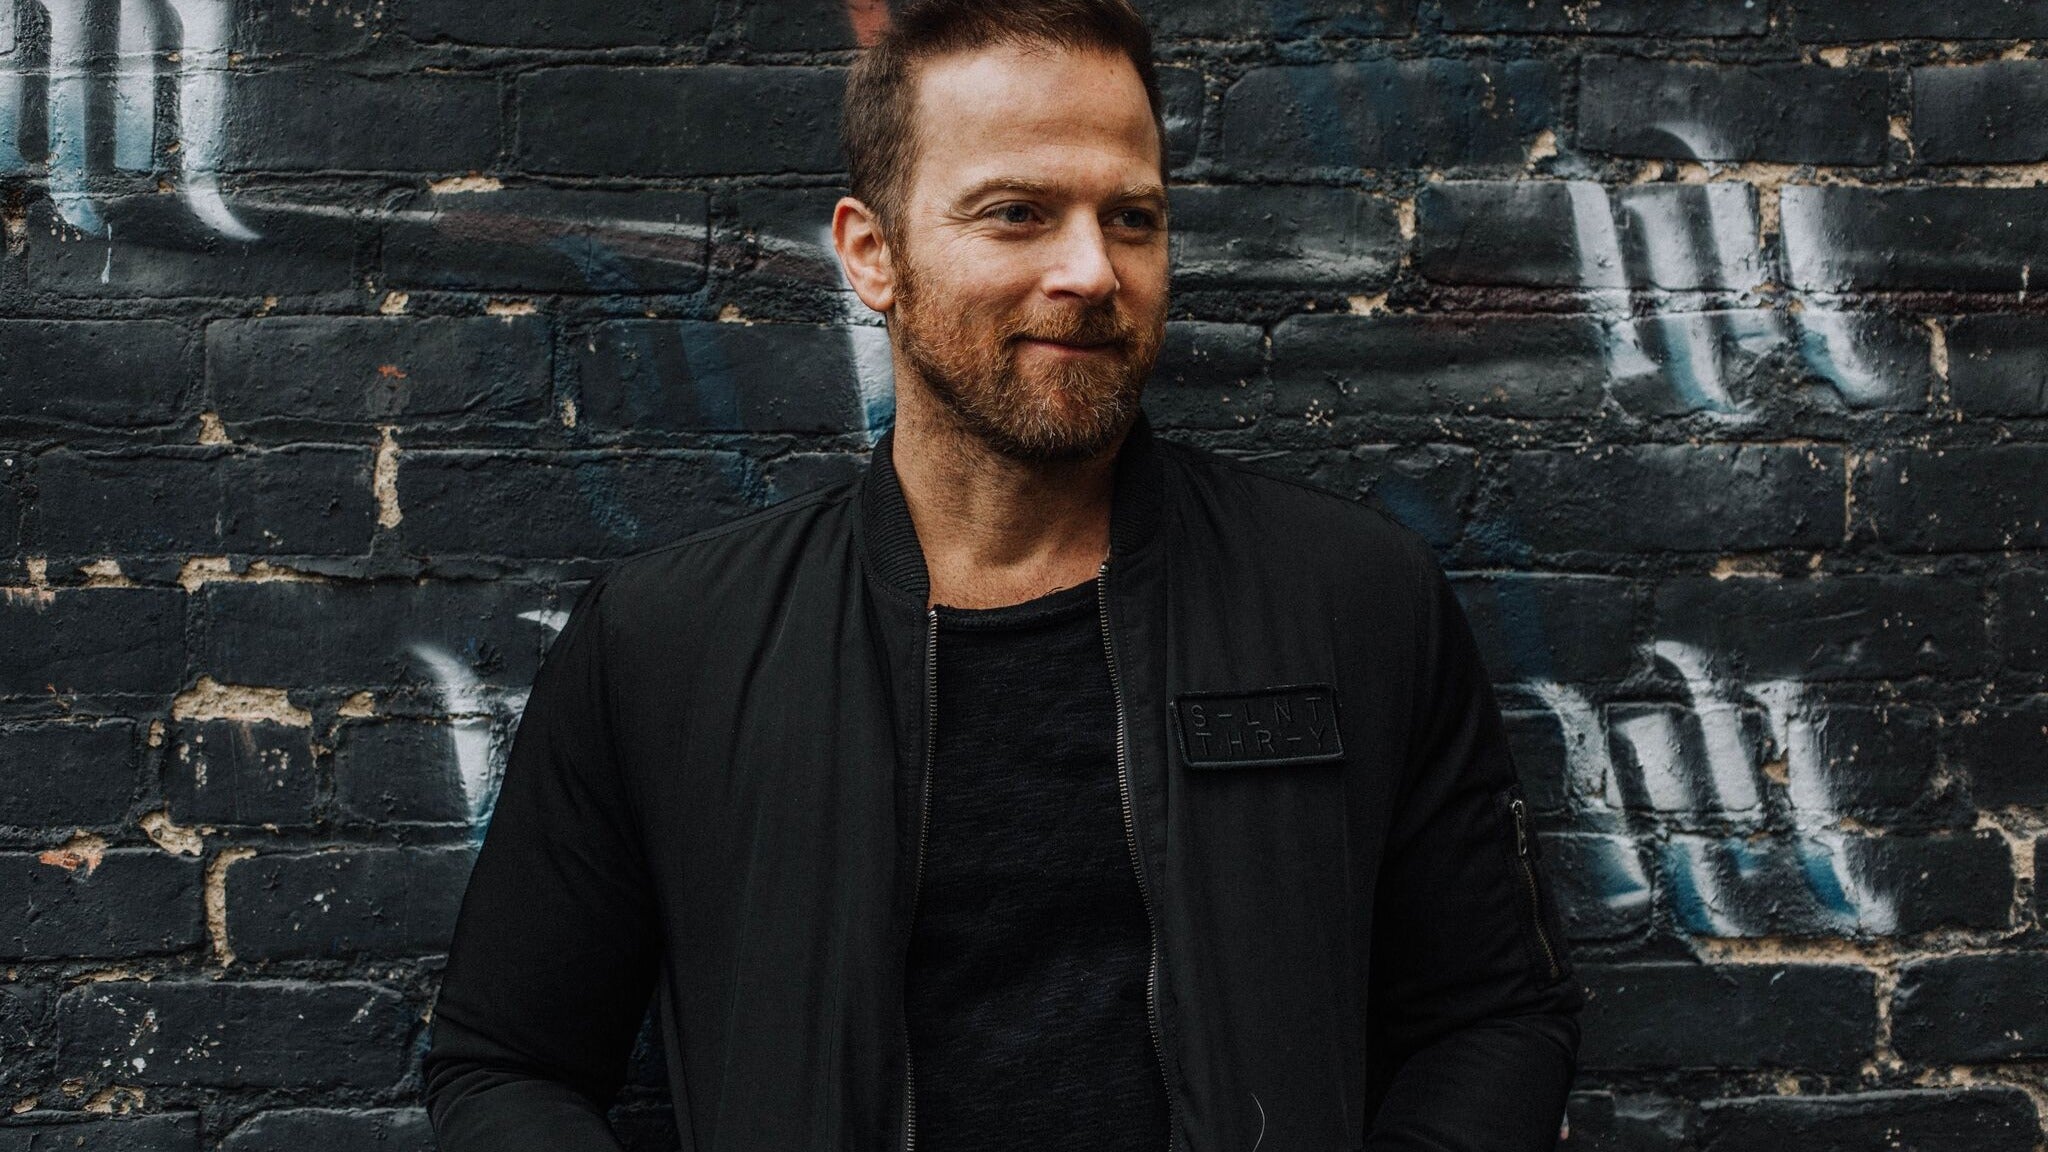 Image used with permission from Ticketmaster | Kip Moore tickets